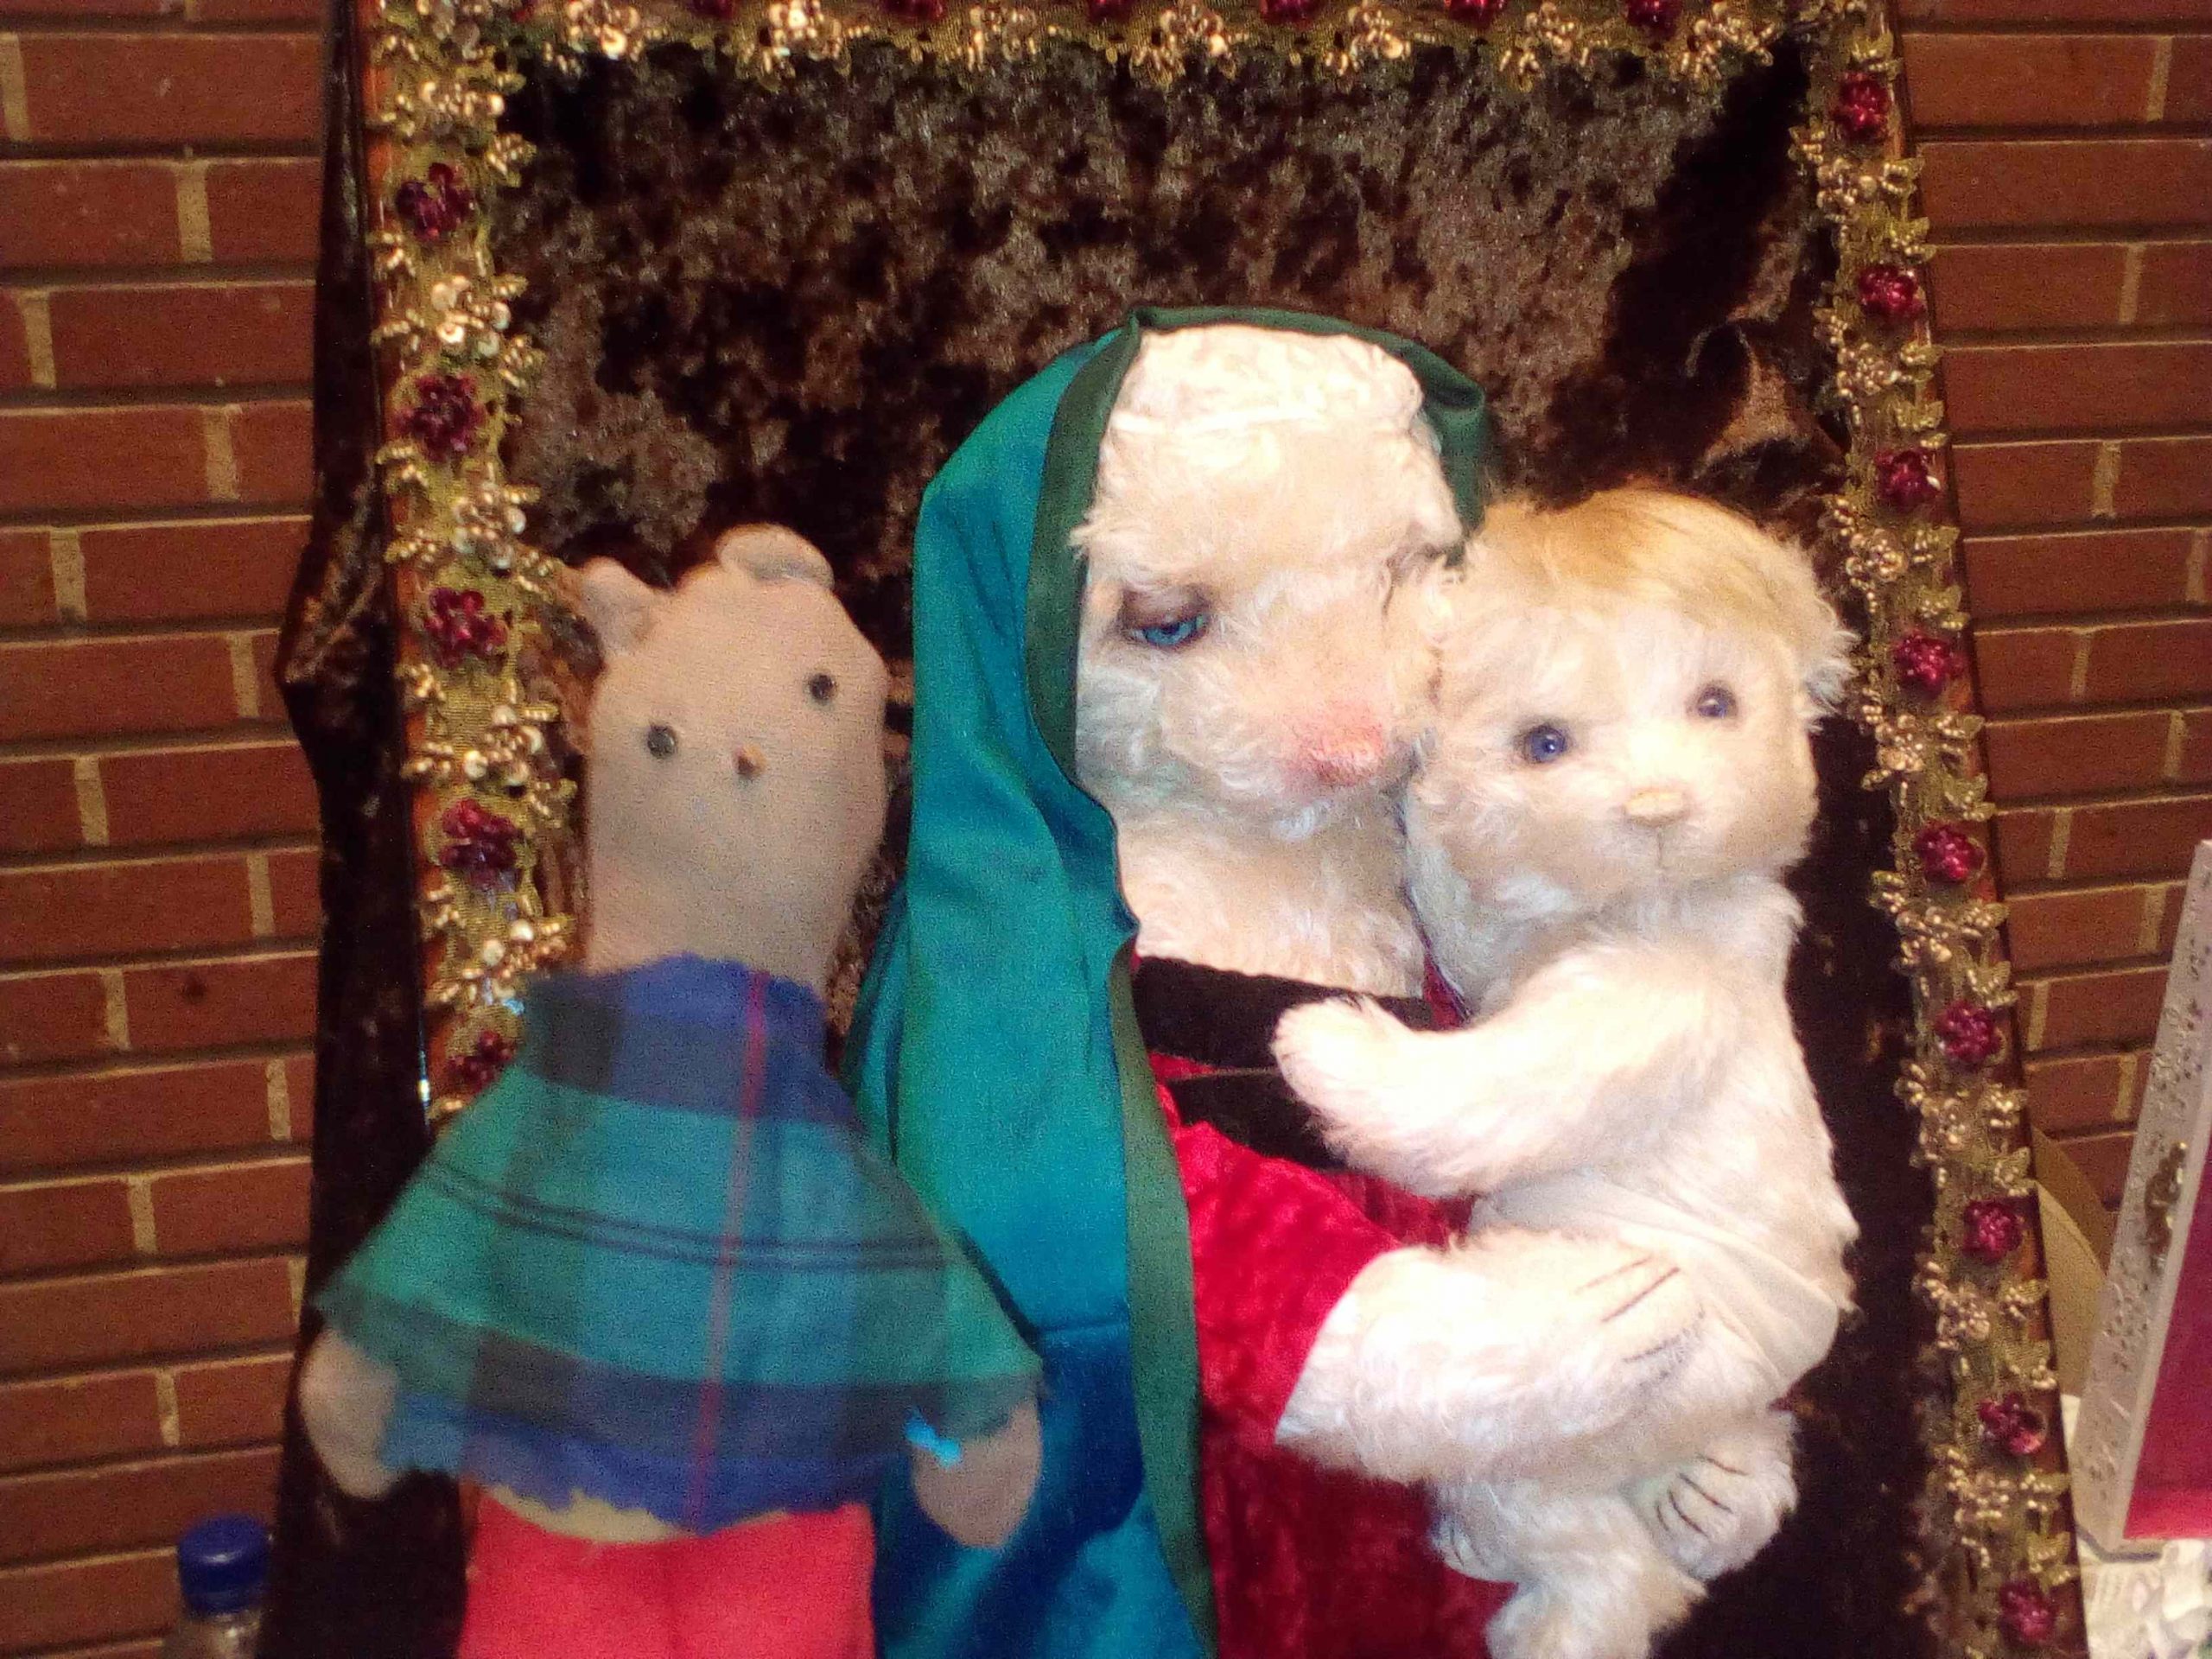 Mini-me version of Bearsac posing with Mary and baby Jesus teddy bears.